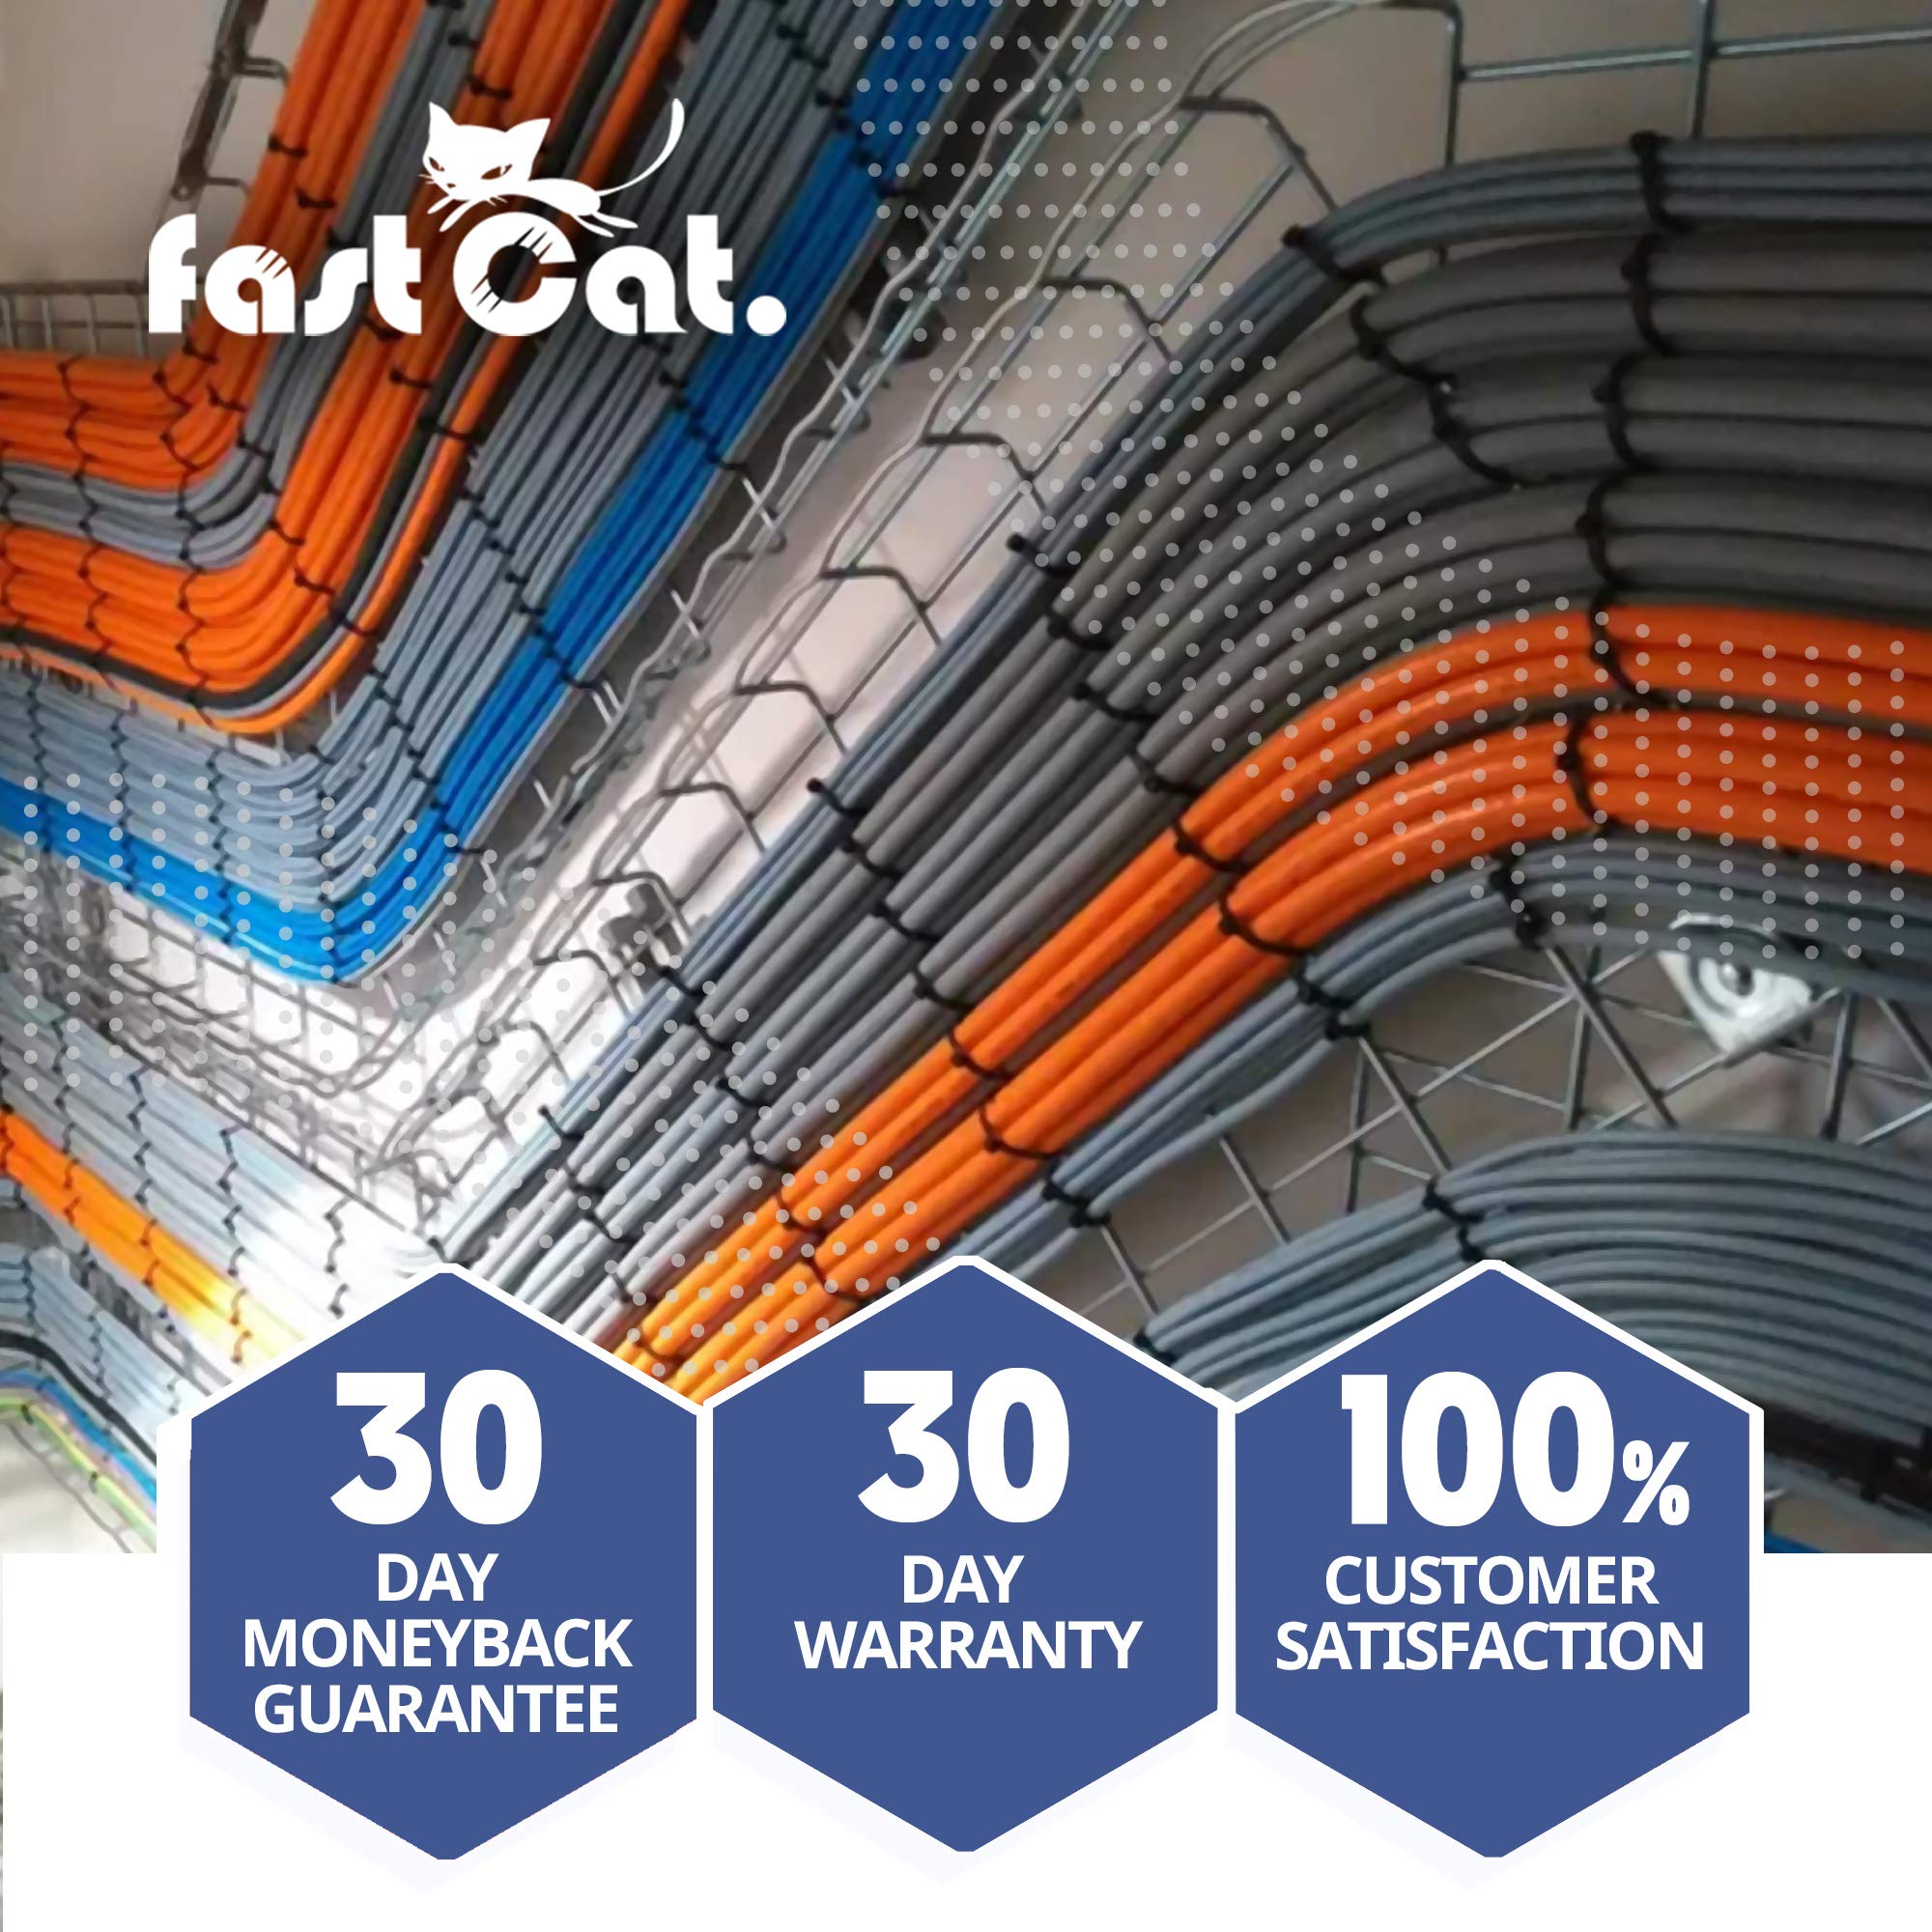 fast Cat. Cat5e Ethernet Cable 1000ft - 24 AWG, CMR, Insulated Bare Copper Wire Internet Cable with FastReel - 350MHZ / Gigabit Speed UTP LAN Cable - CMR (Orange)